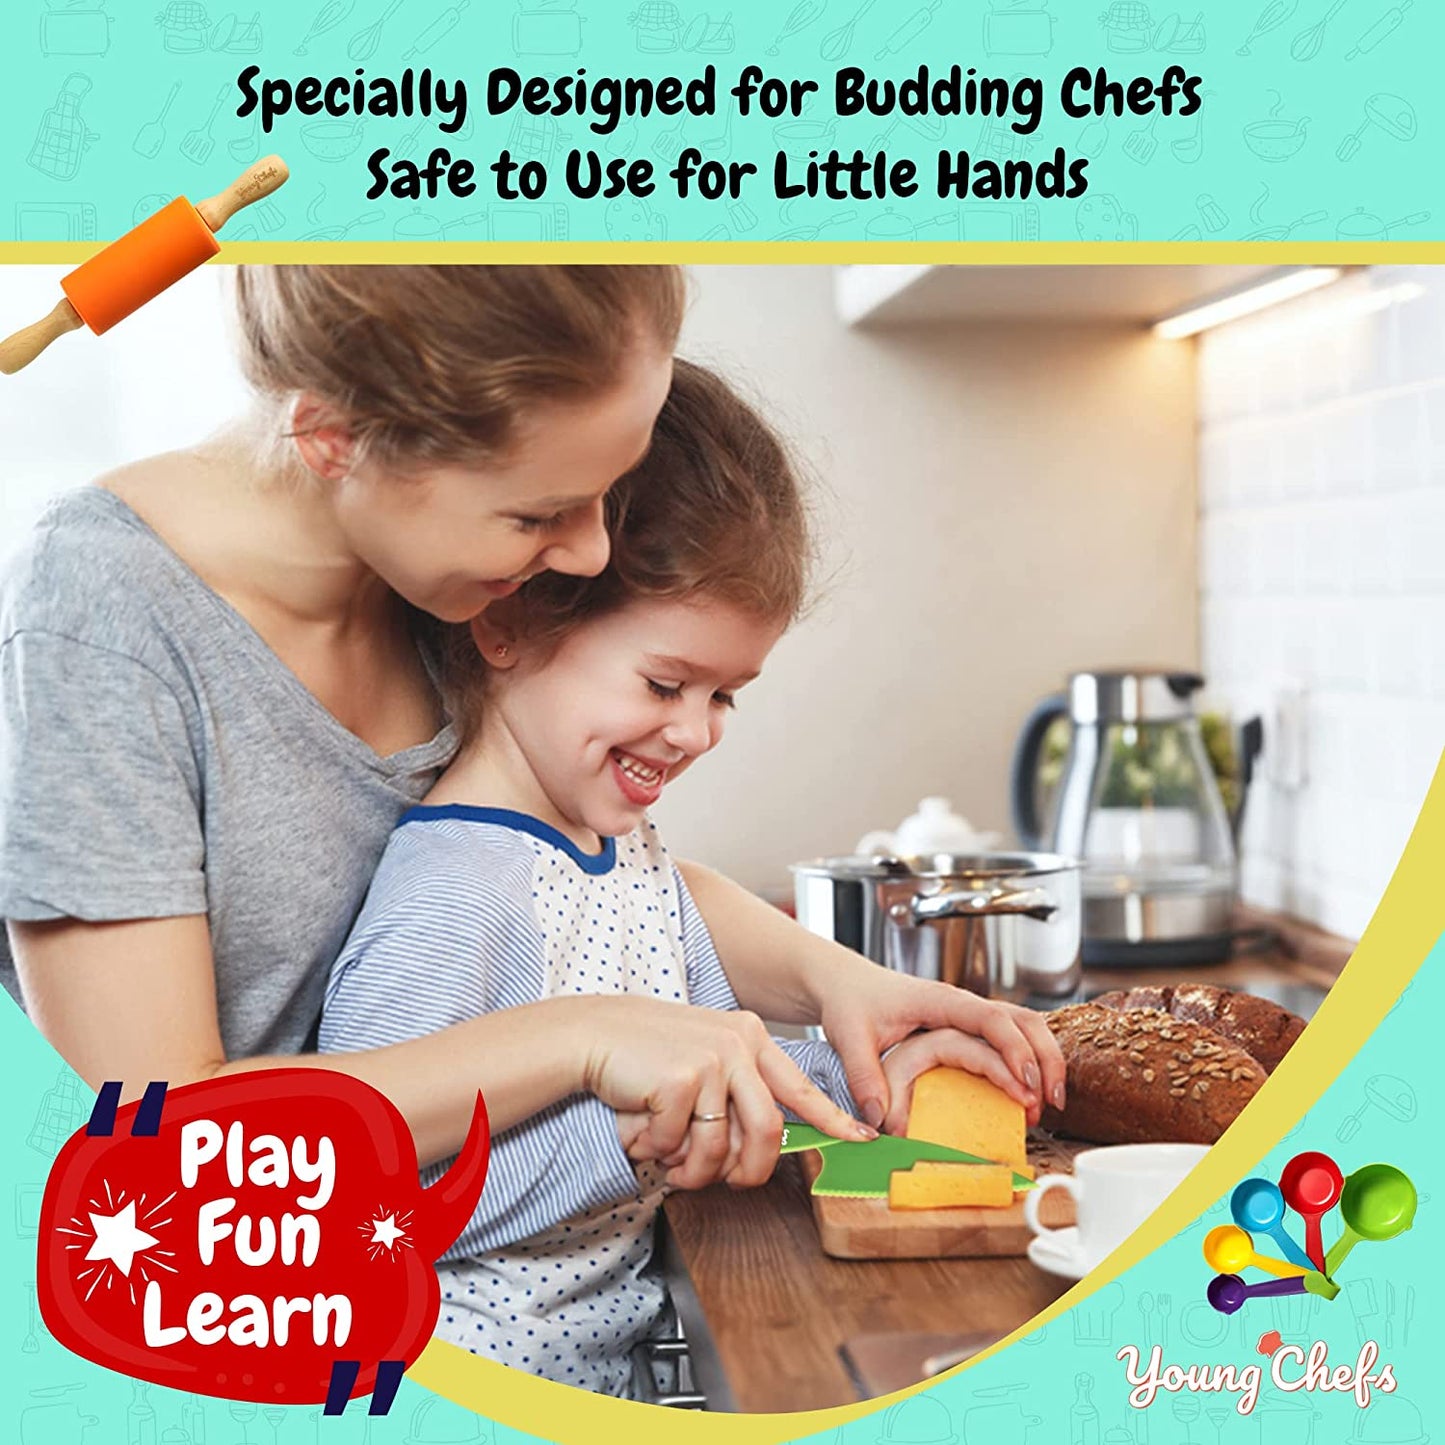 Young Chefs Baking Tool Set